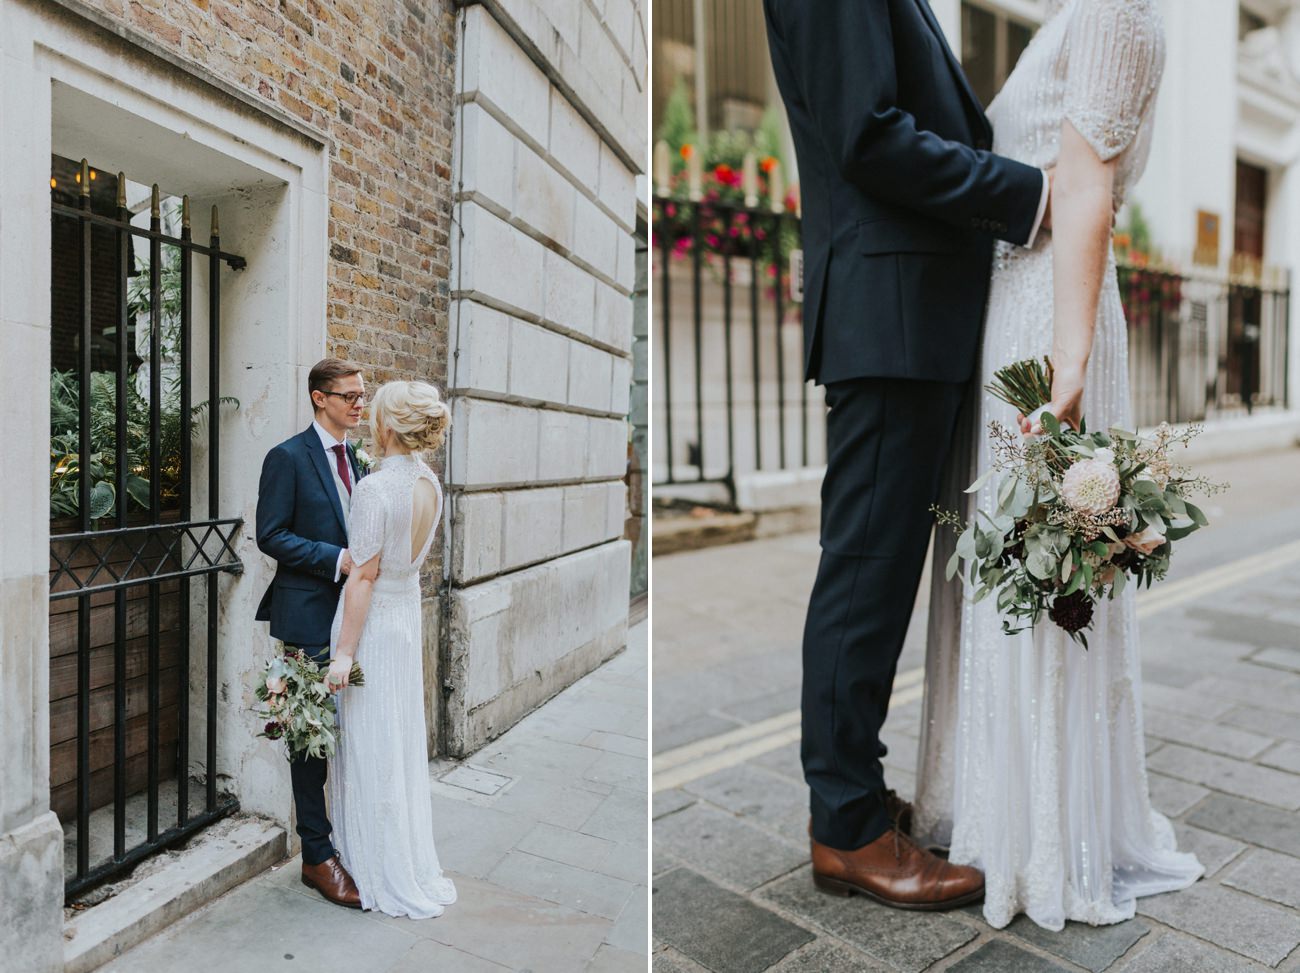 Bride and groom standing facing each other in a London street.
Detail of a bouquet and wedding dress.